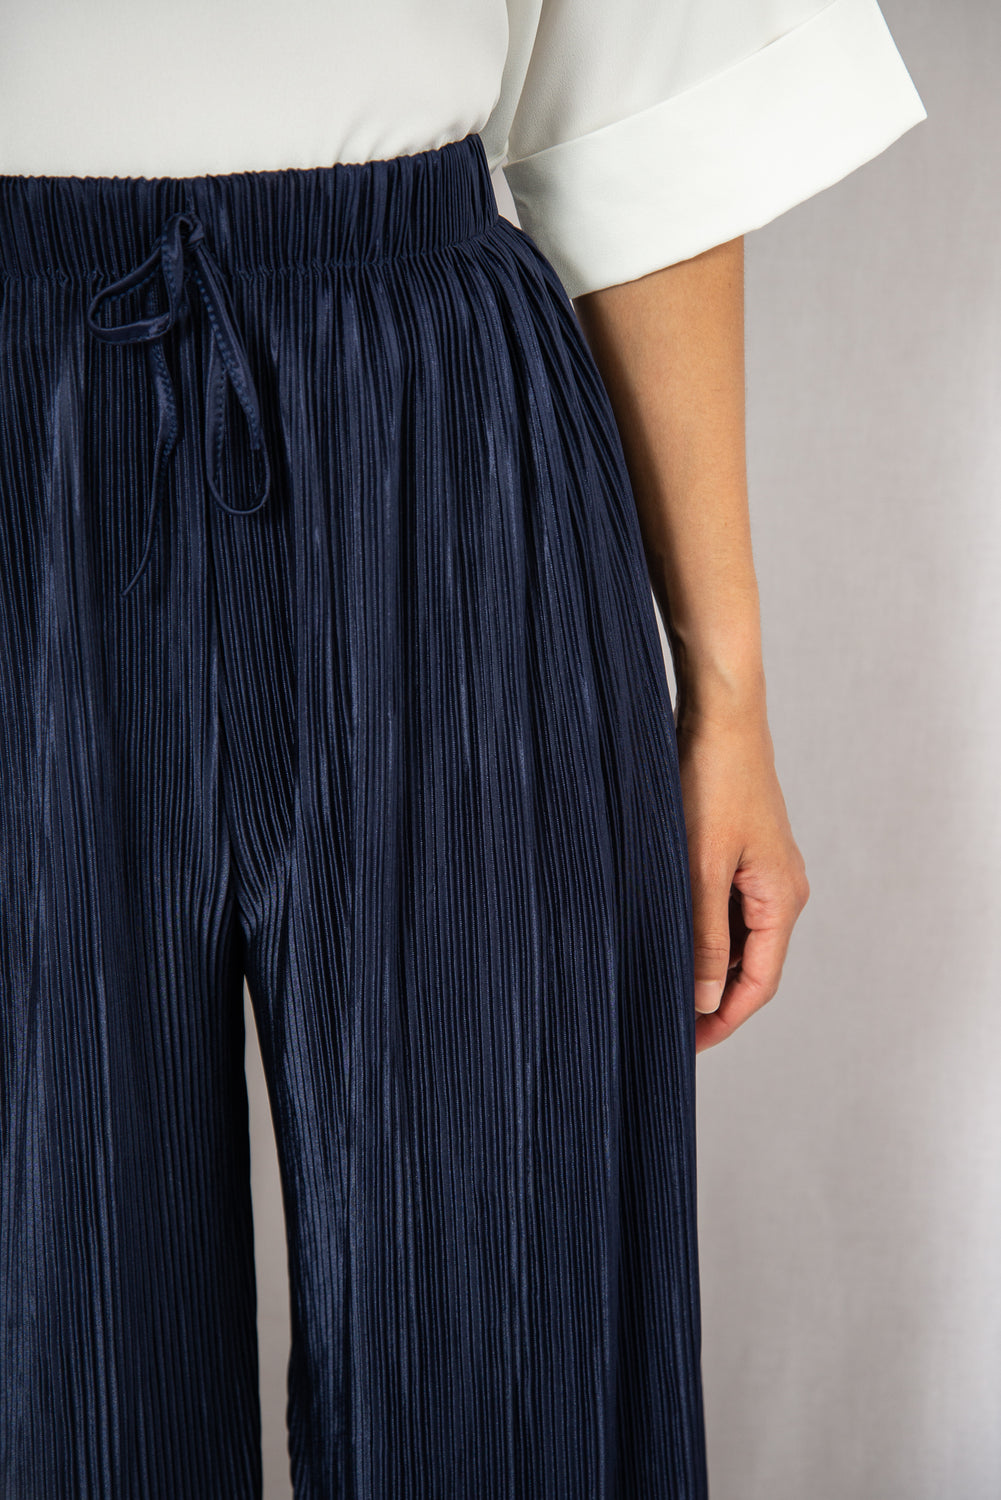 MODZ Navy Loose Pleated Pants Modest Wide Trousers With Pleats Elastic Waistband in Lightweight Polyester